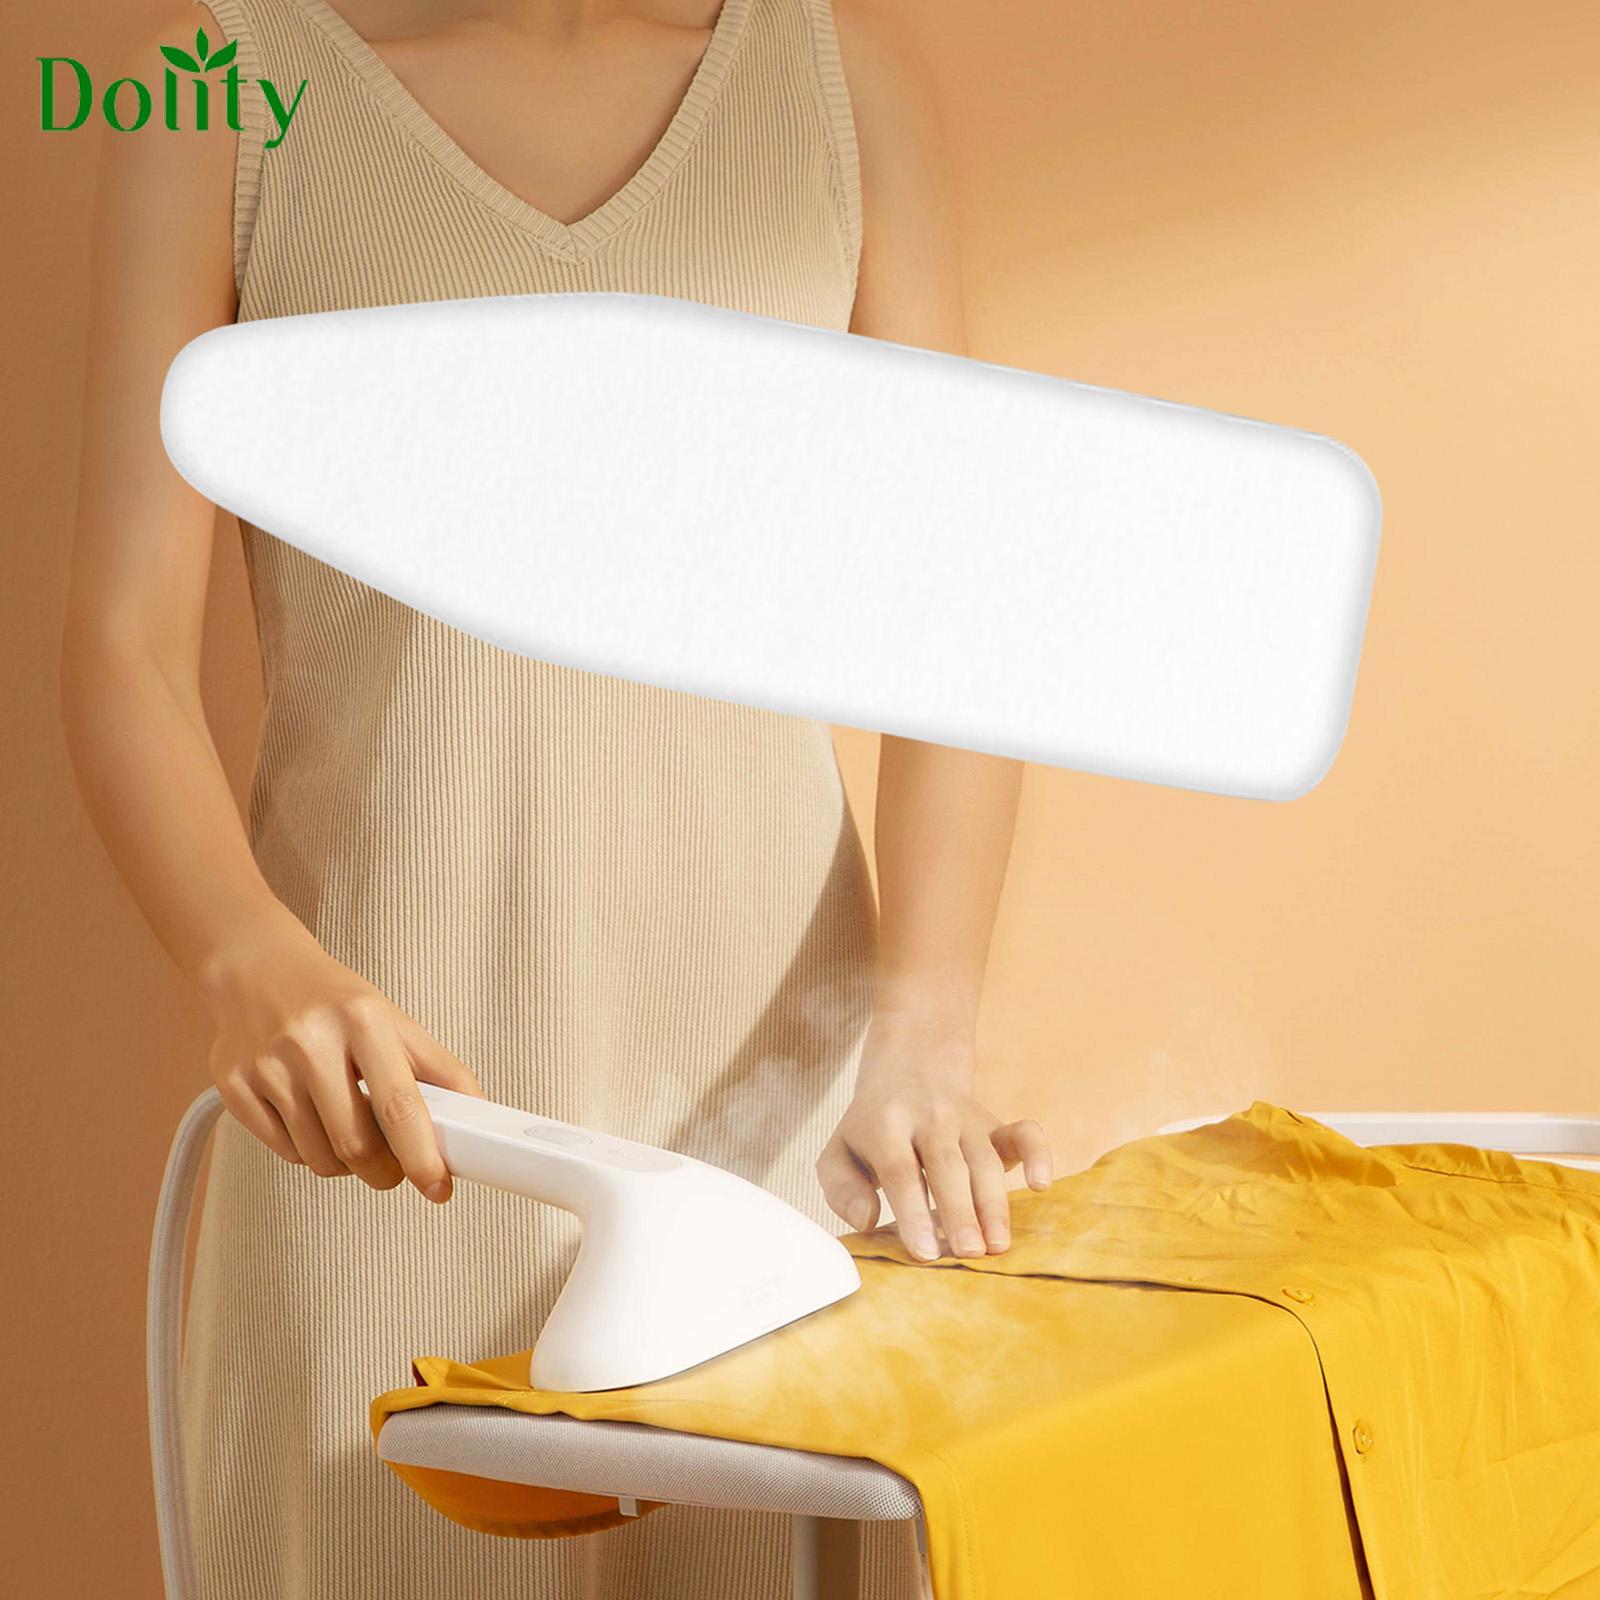 Dolity Ironing Board Padding Ironing Clothes Space Saving Heat Resistant